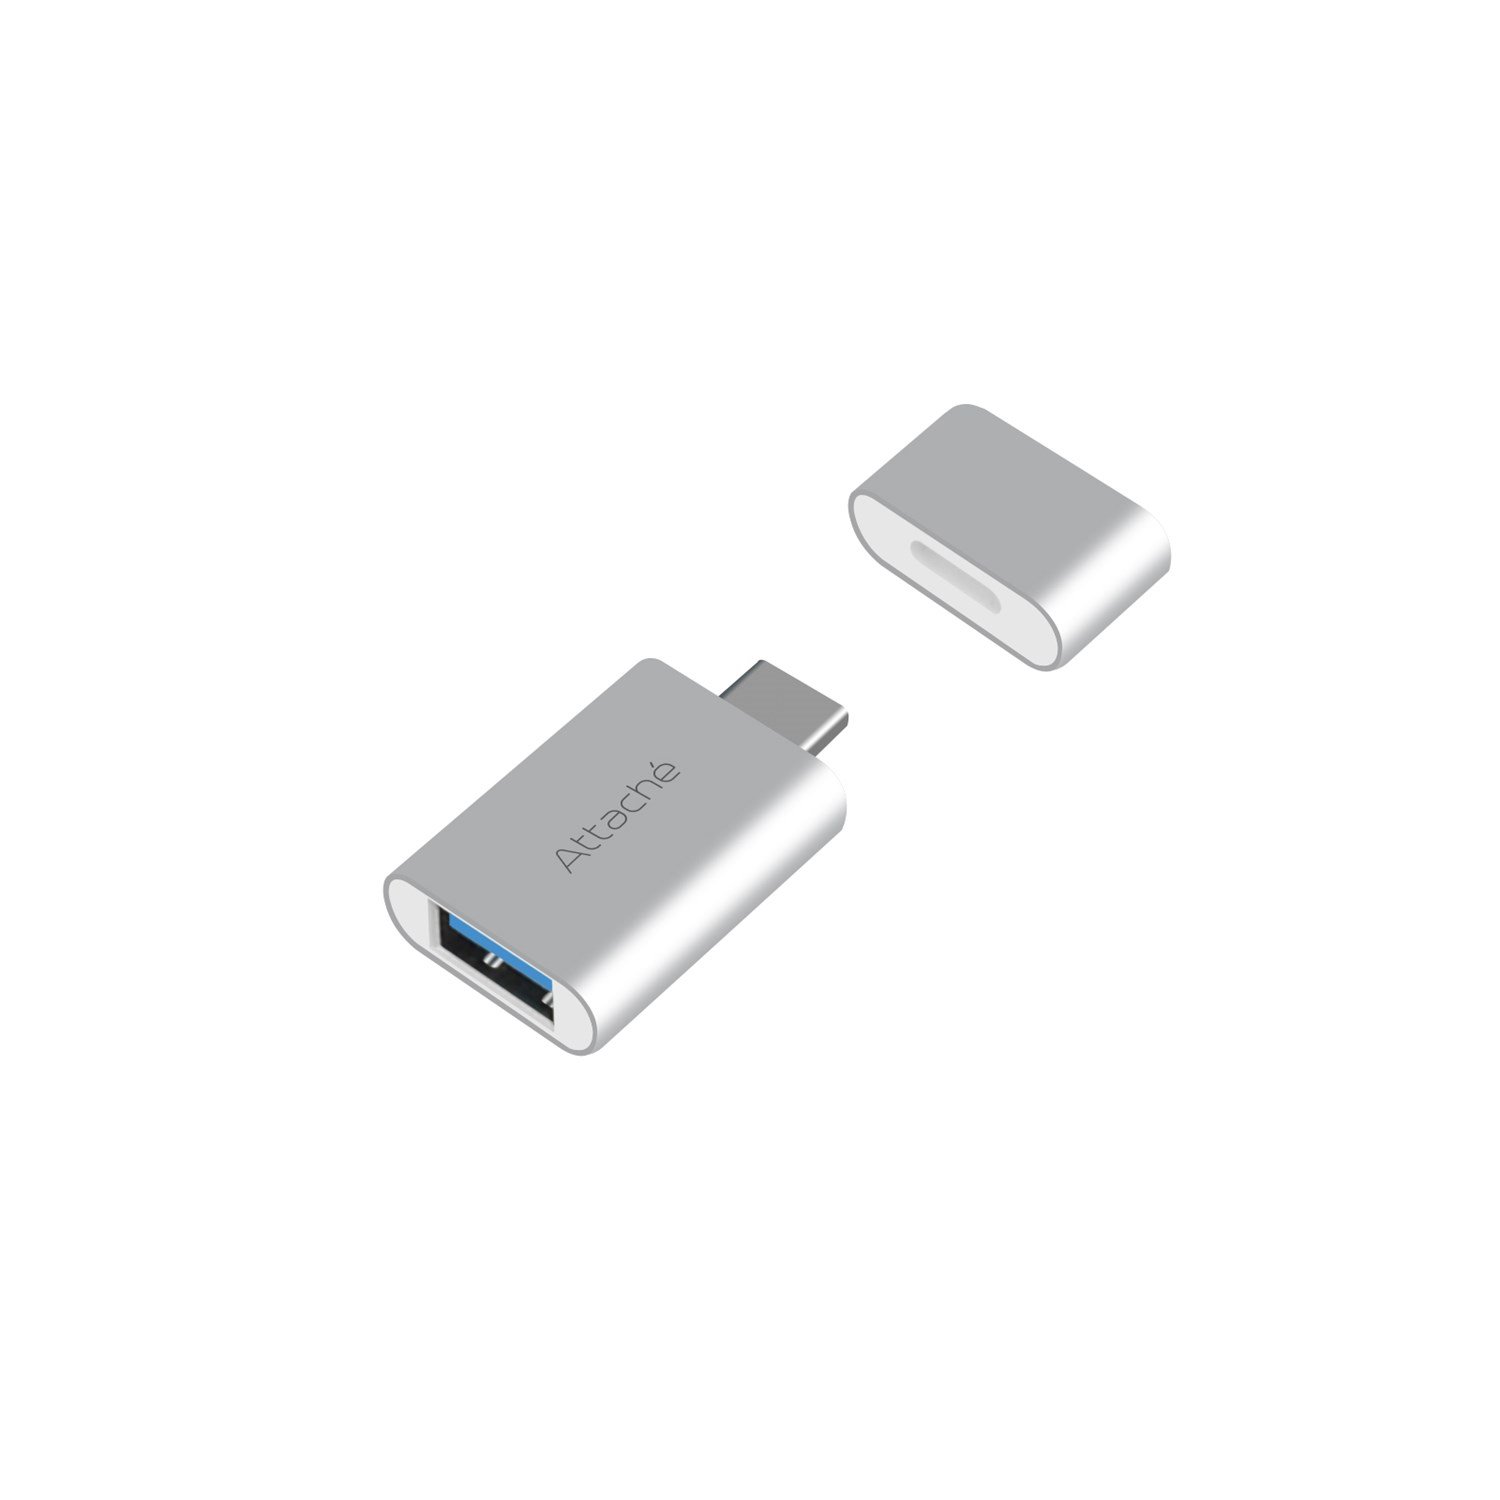 Mbeat Attach&#233; Usb Type-C To Usb 3.1 Adapter